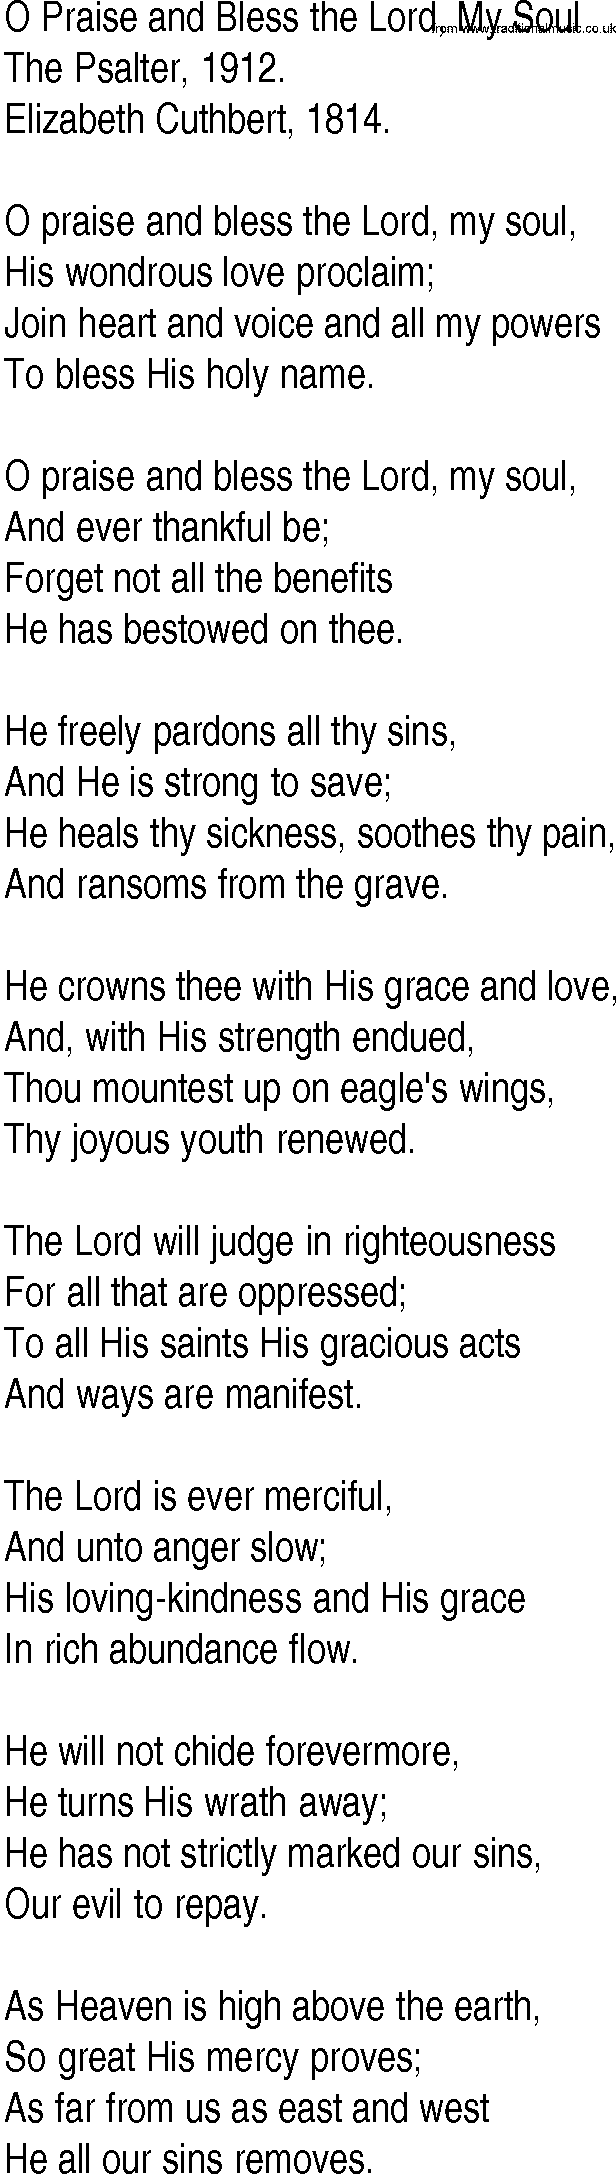 Hymn and Gospel Song: O Praise and Bless the Lord, My Soul by The Psalter lyrics